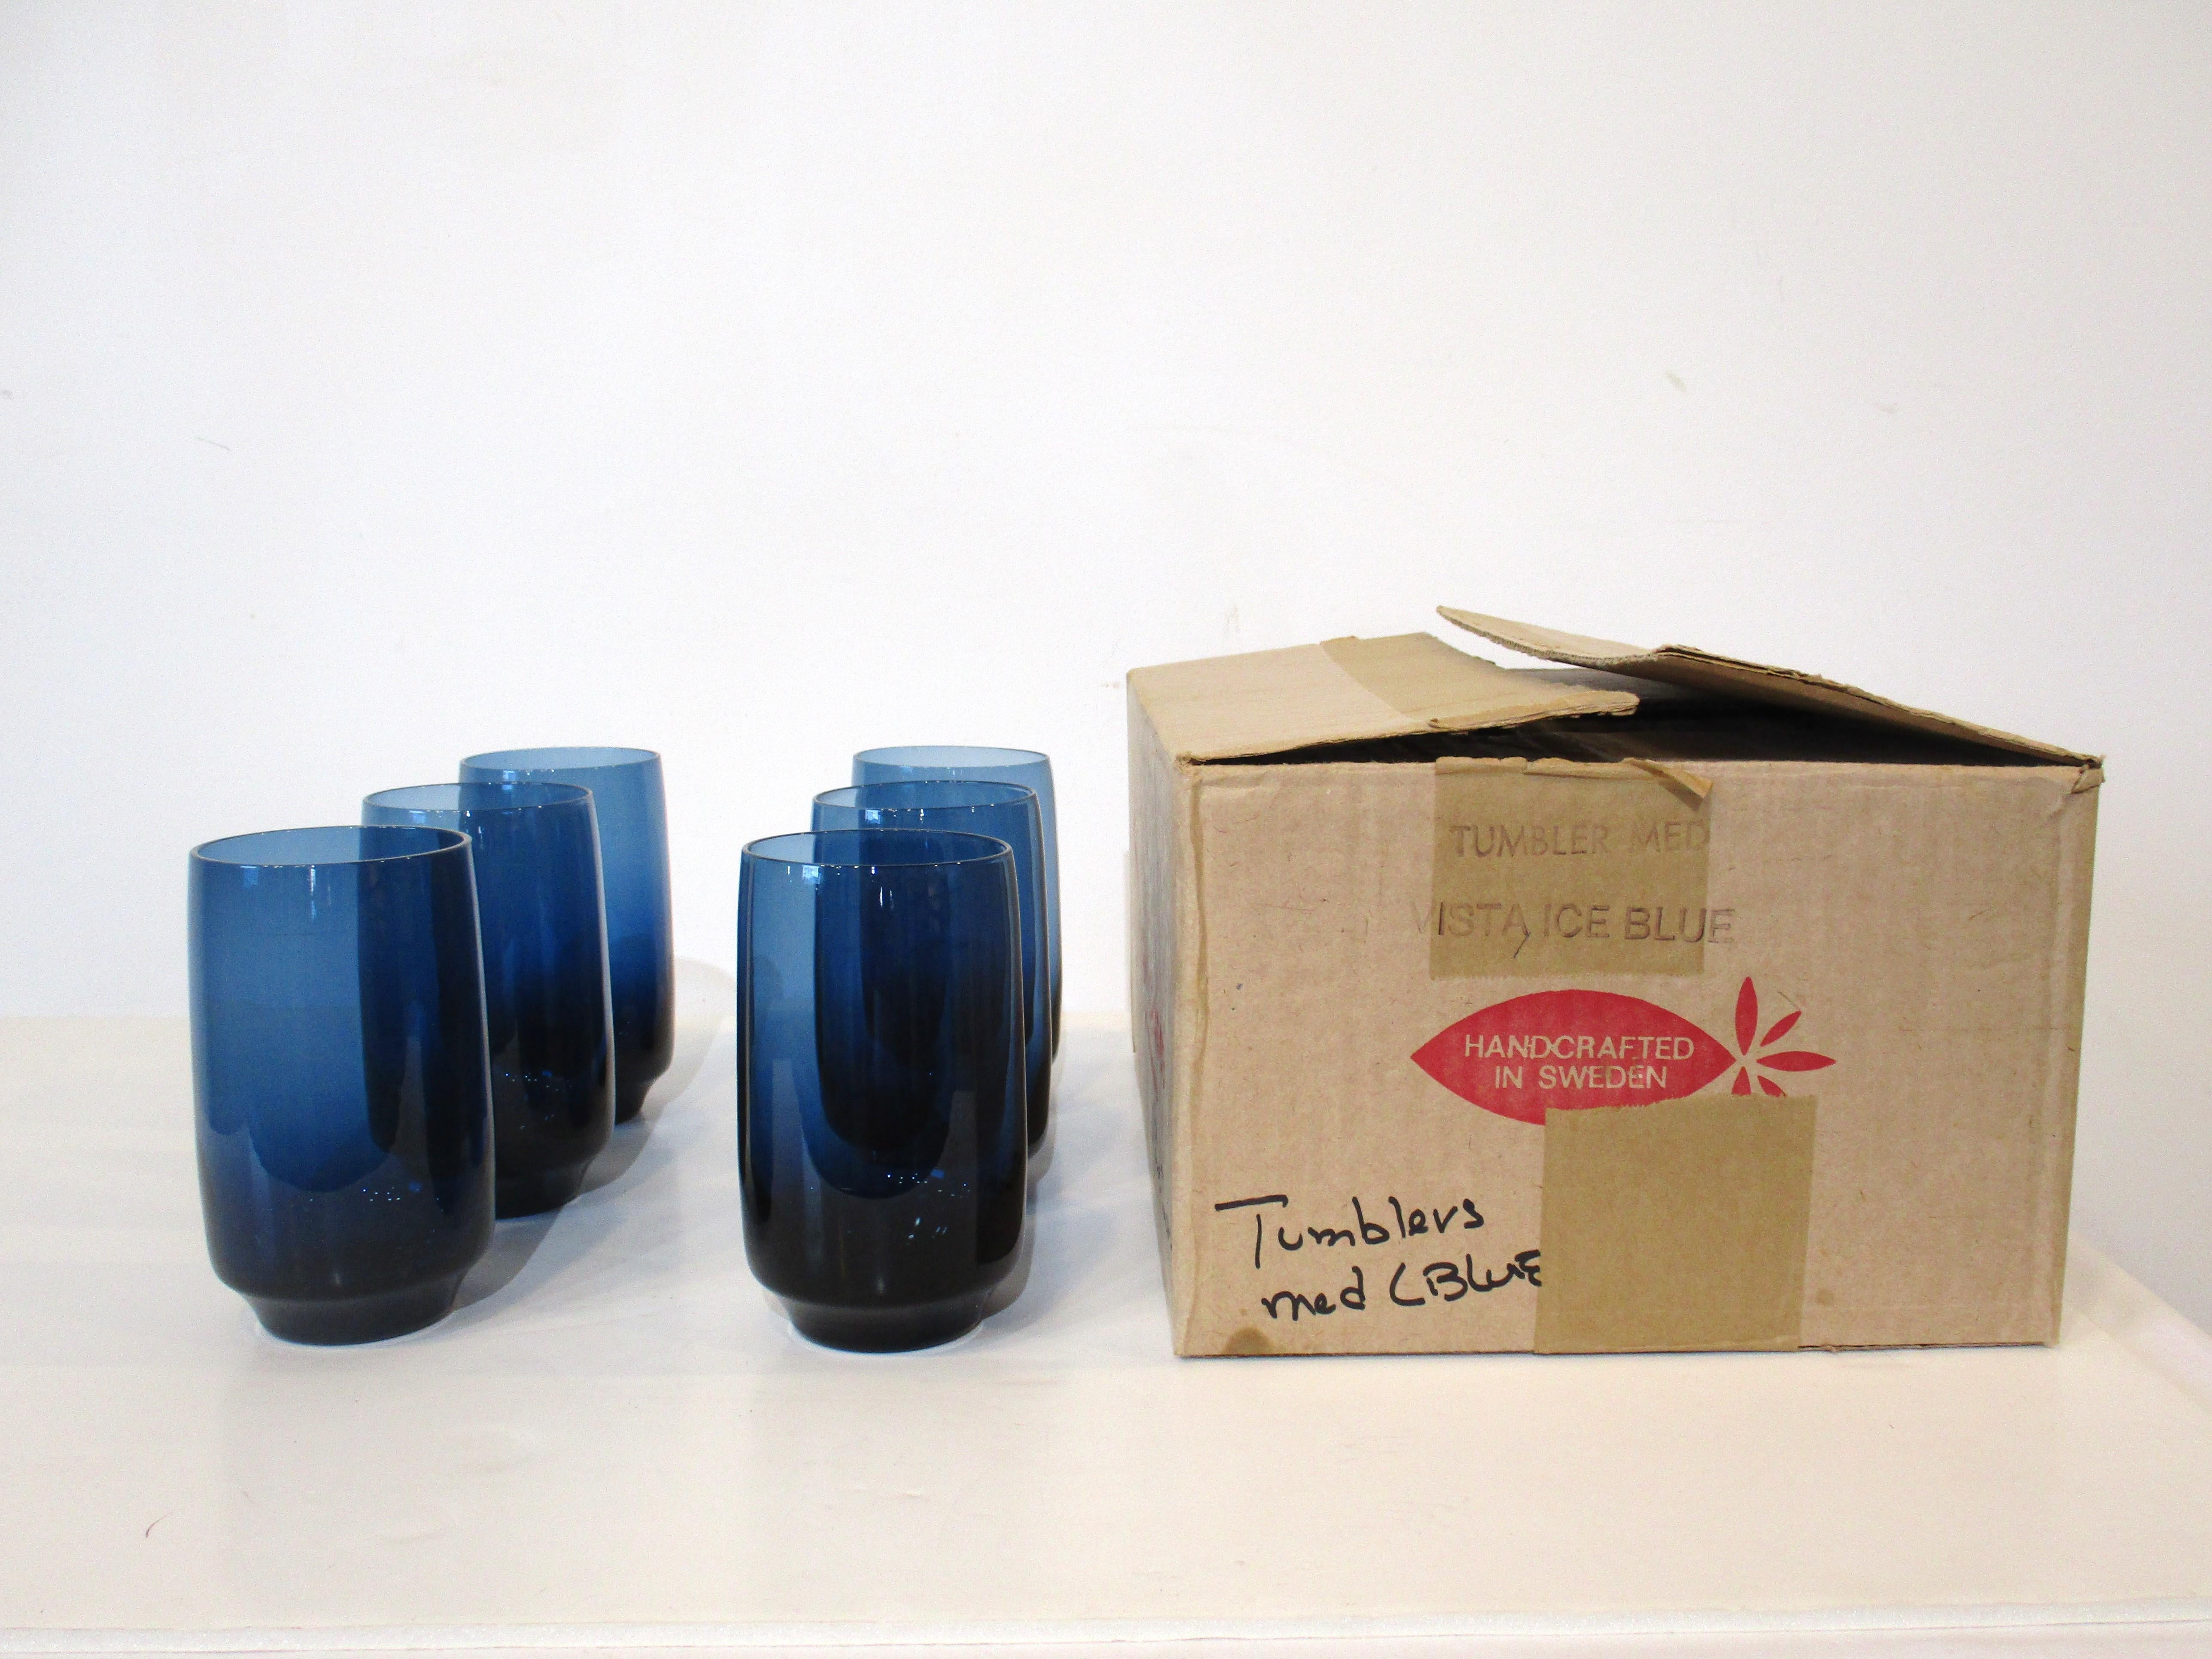 A set of six beautifully and ergonomically crafted medium sized tumblers in Vista Ice Blue this color is really reminiscent of Scandinavia. Well balanced and nice feeling in your hands these are NOS ( new old stock ) still in the original packing